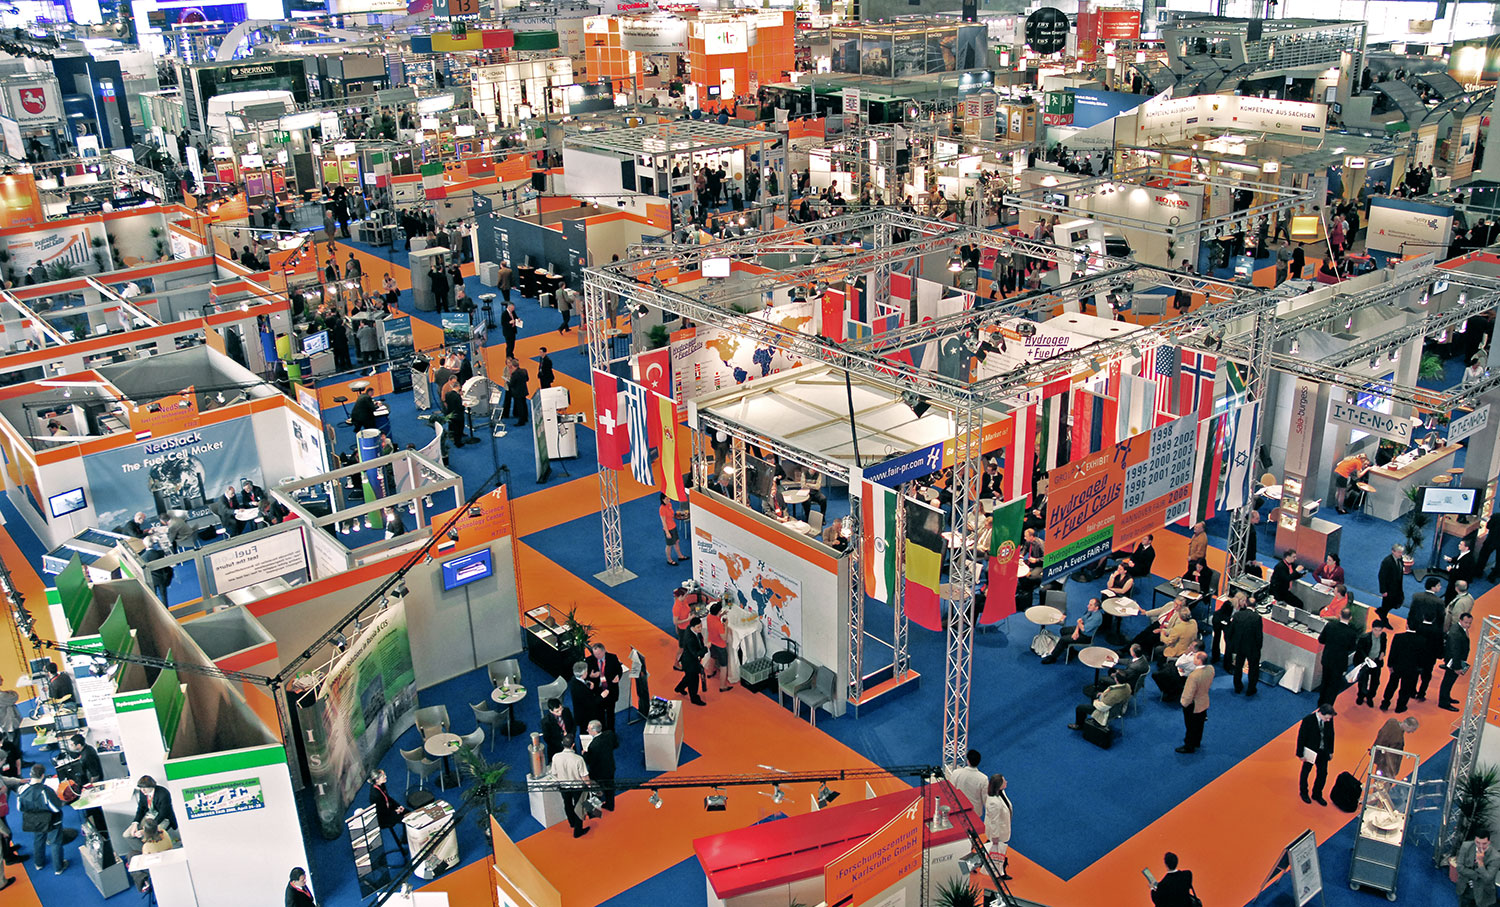 Totale-Hannover-Messe-2007